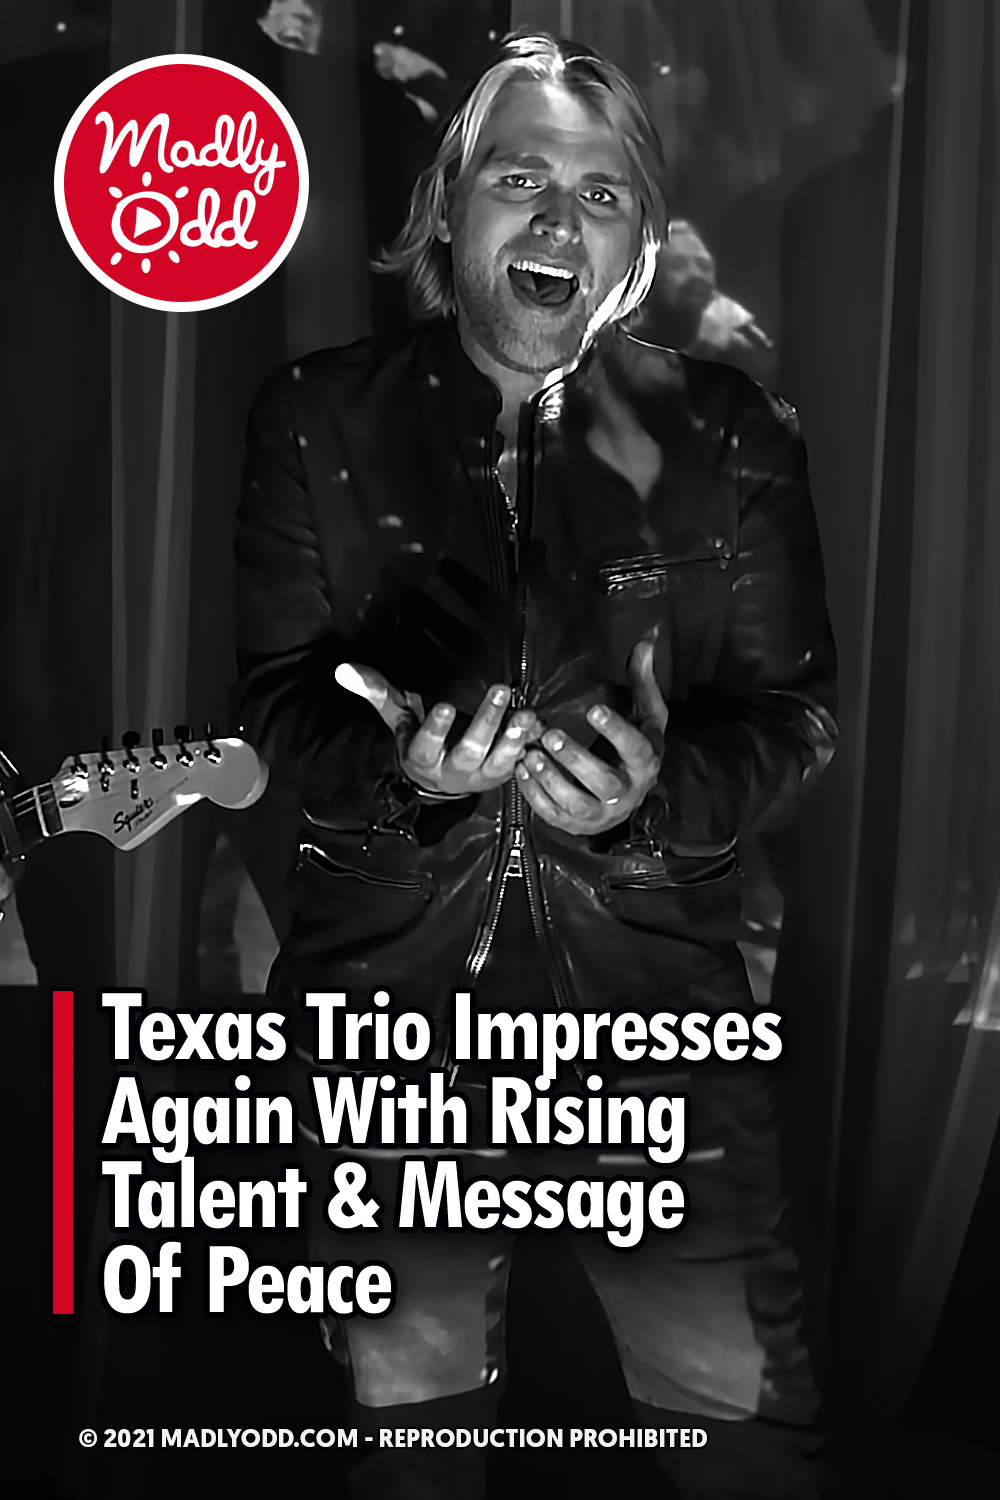 Texas Trio Impresses Again With Rising Talent & Message Of Peace